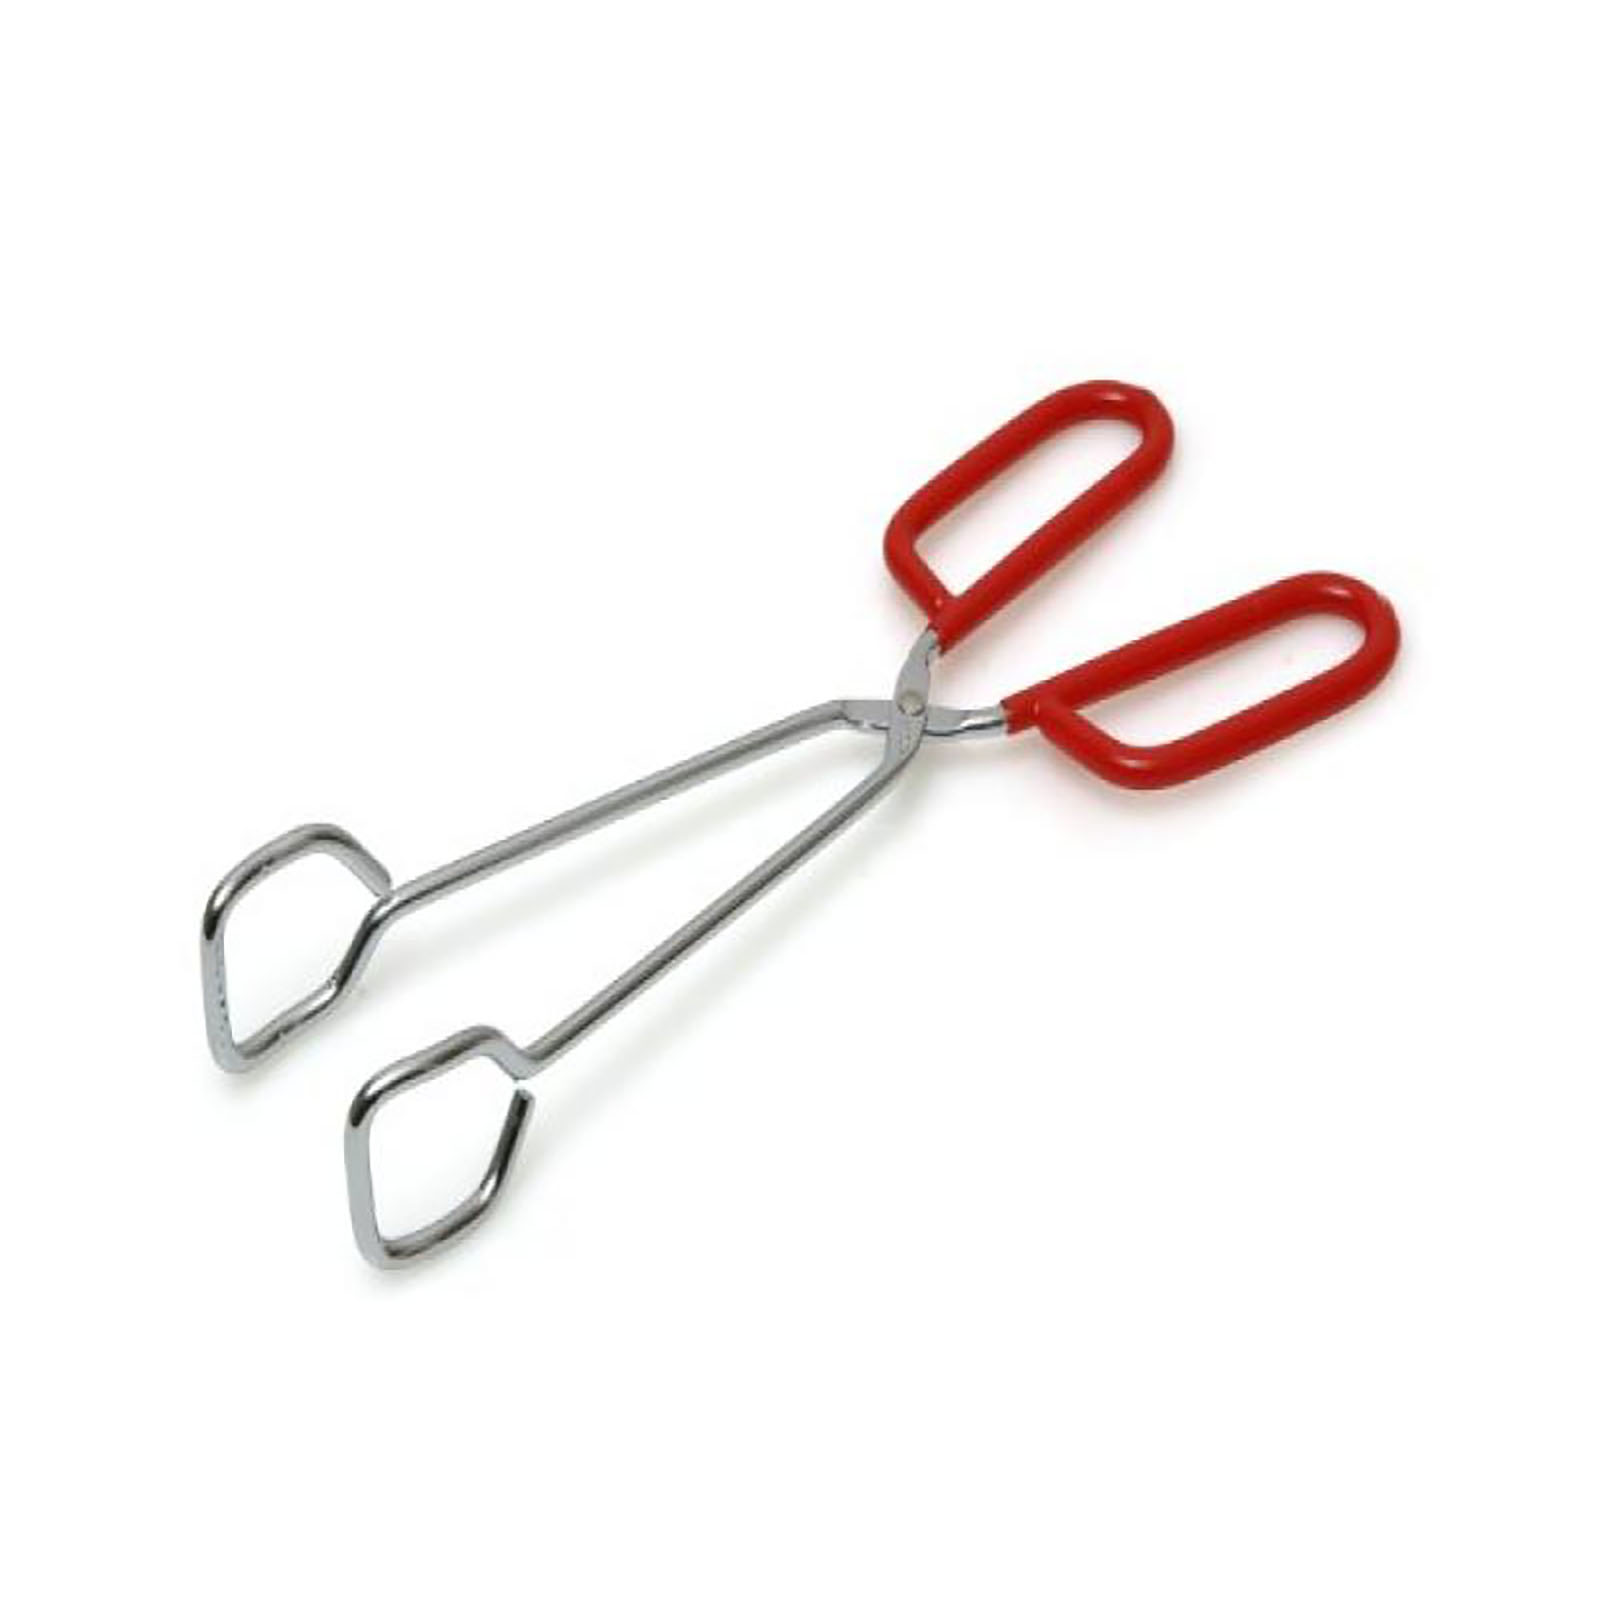 Victorio Roots & Branches Kitchen Tongs - Red